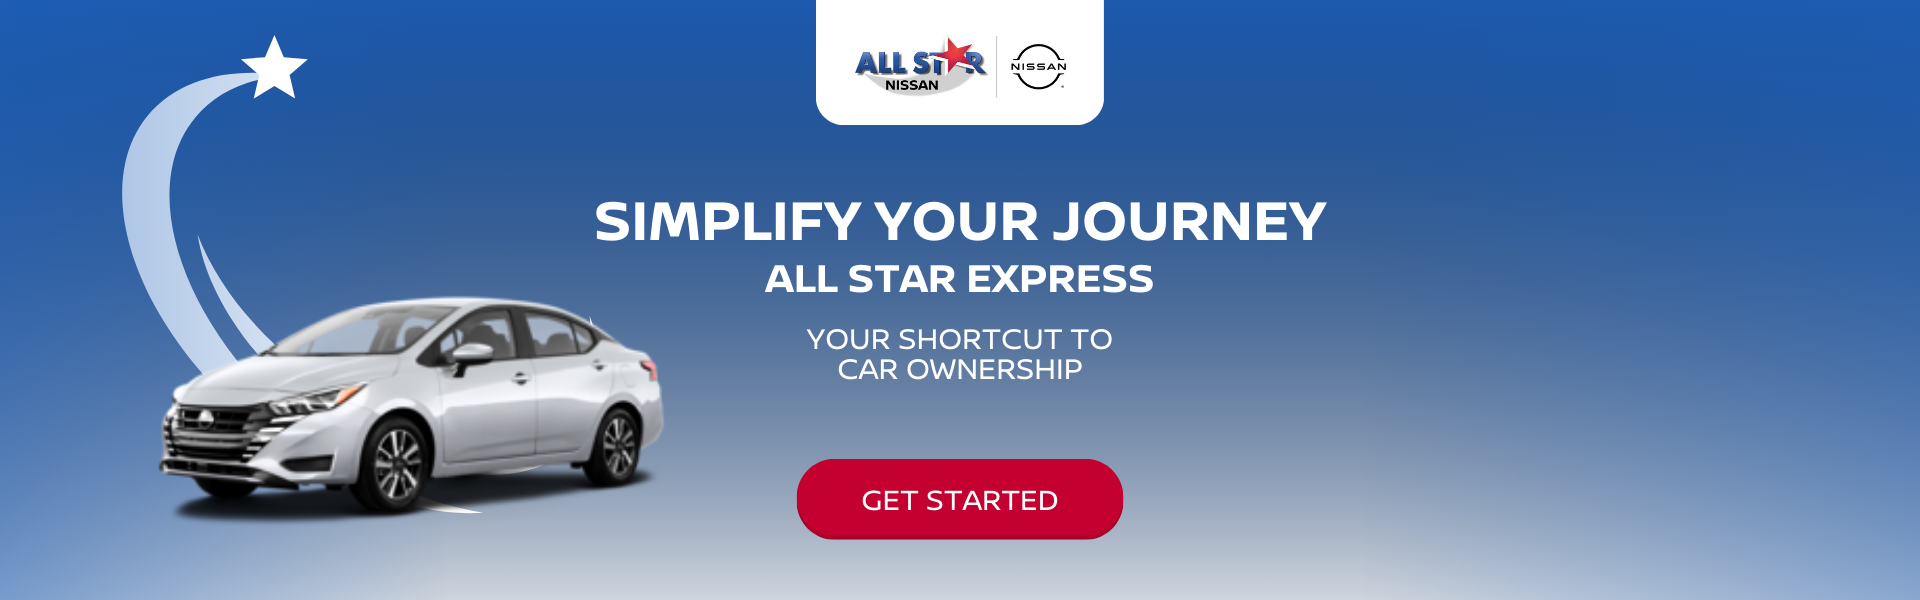 Get Started with All Star Express